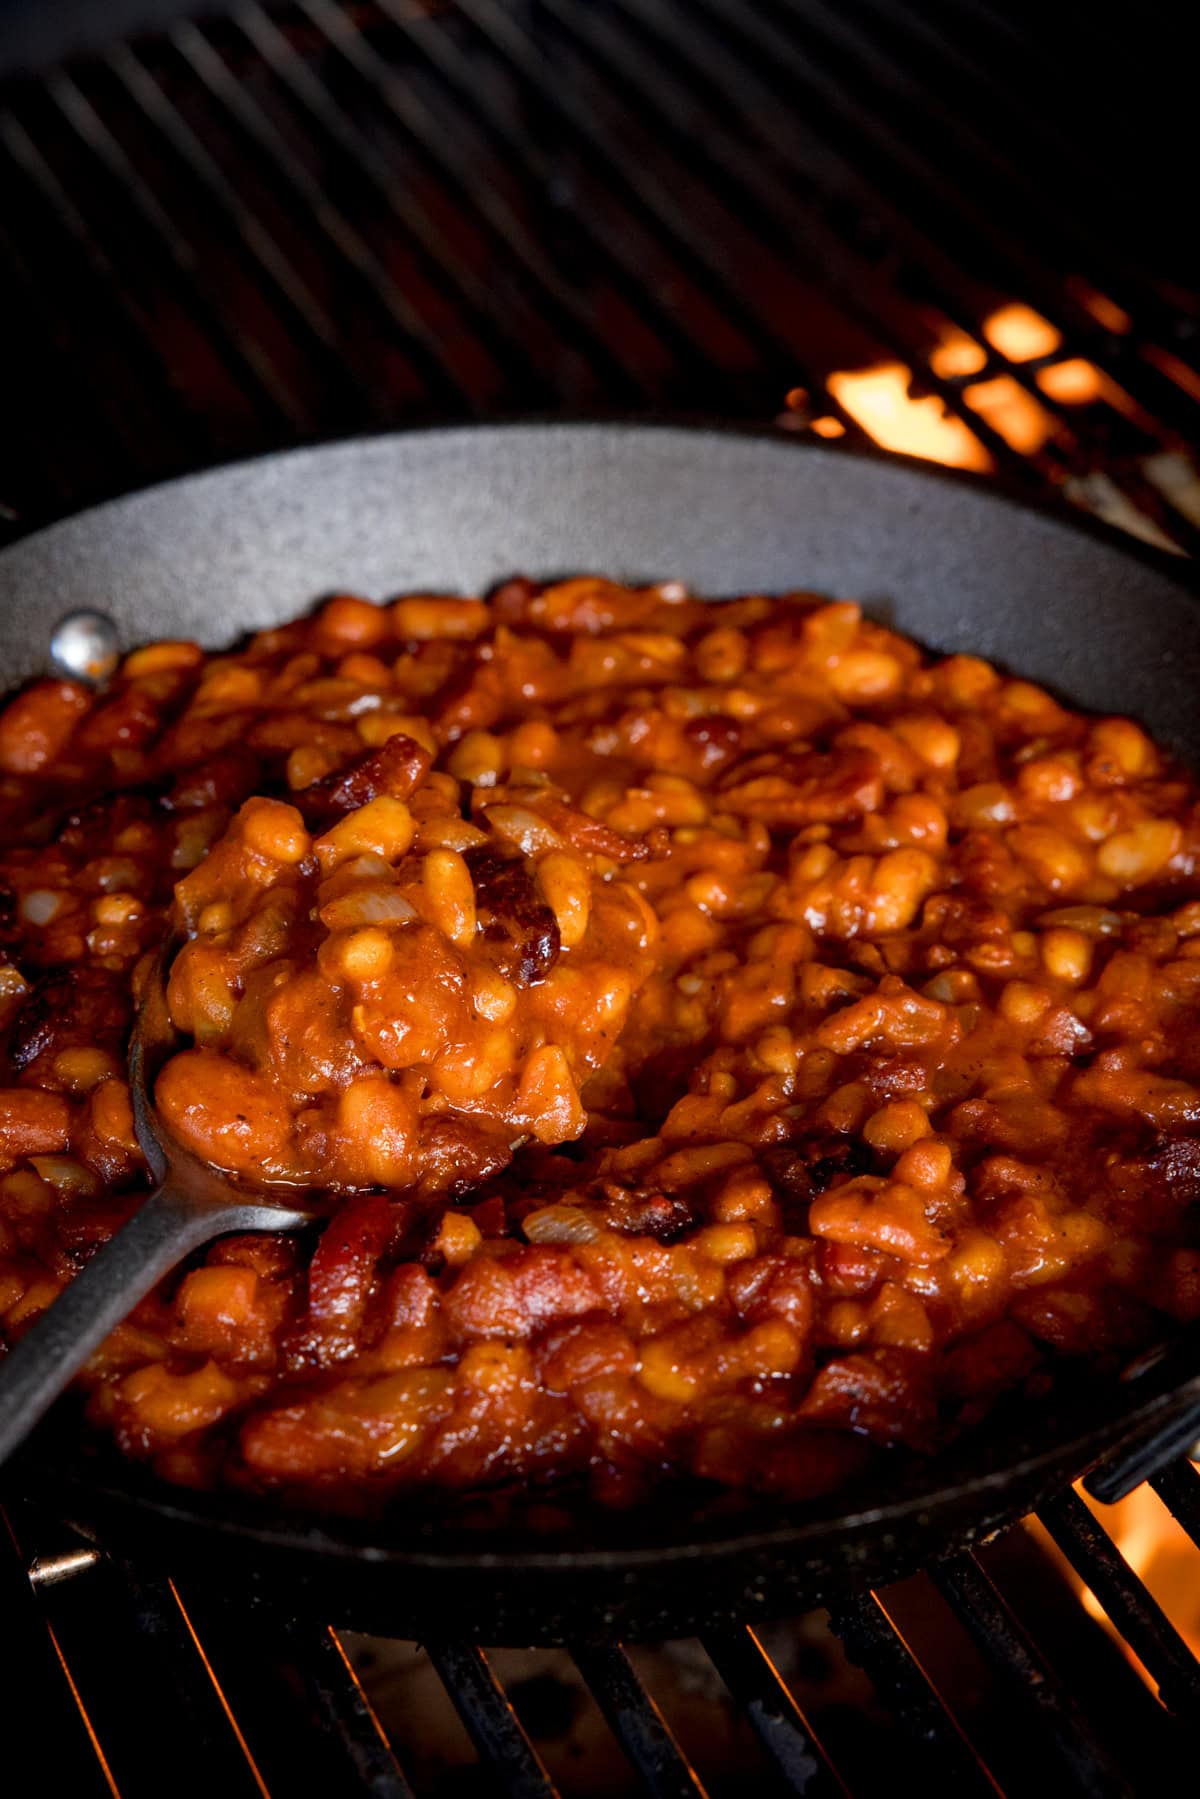 A square shot of BBQ Beans. The BBQ Beans are in a black skillet, with a silver spoon sticking out of the dish, which is scooping some of the beans in the dish. In the background, you can see that the skillet is on a lit barbeque, in the top right of the background you can see a small flame from the barbeque.